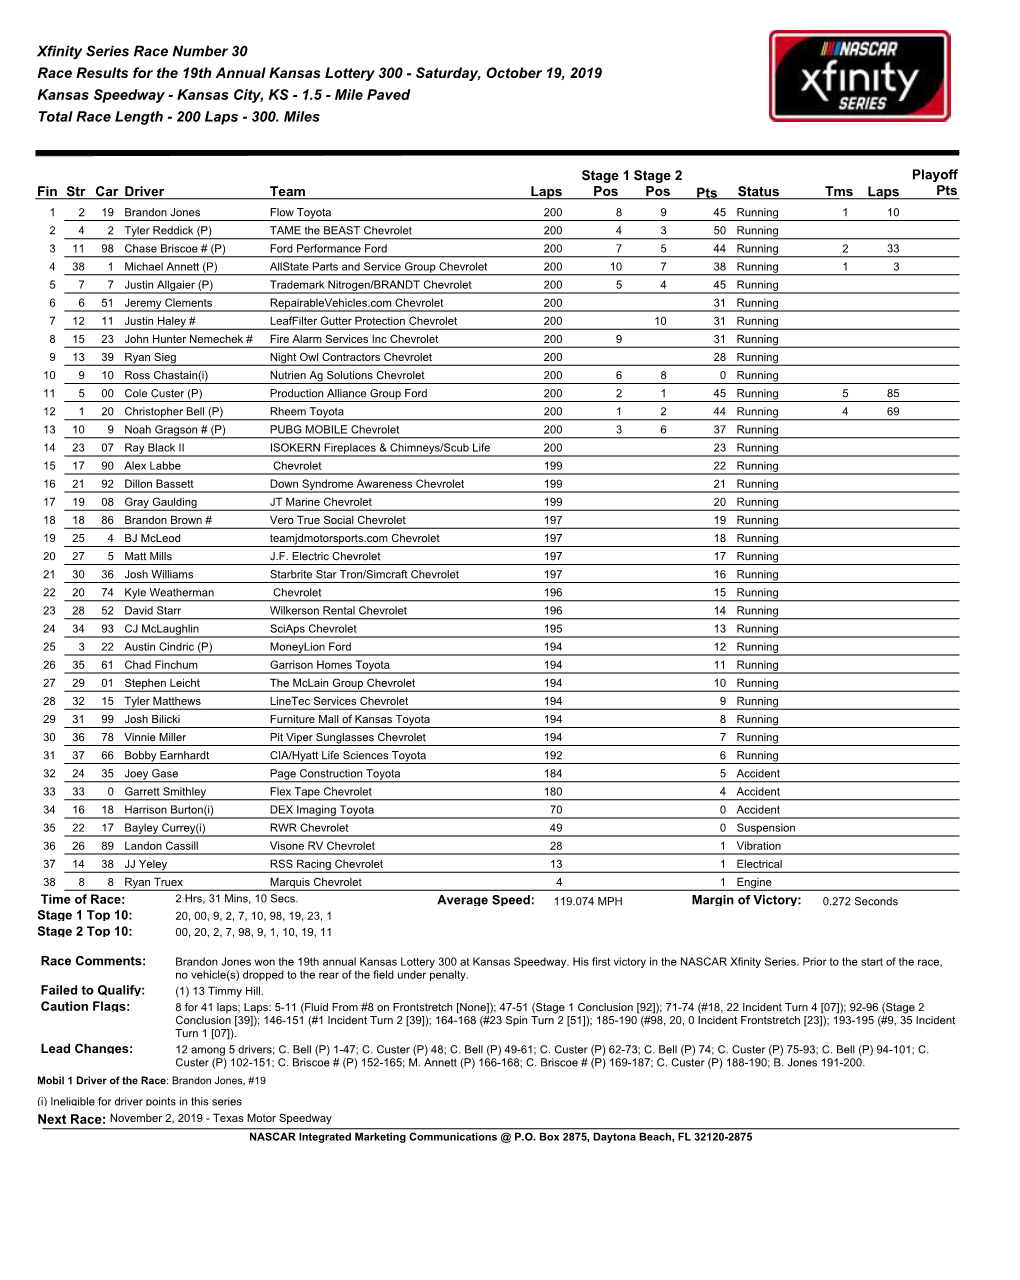 Xfinity Series Race Number 30 Race Results for the 19Th Annual